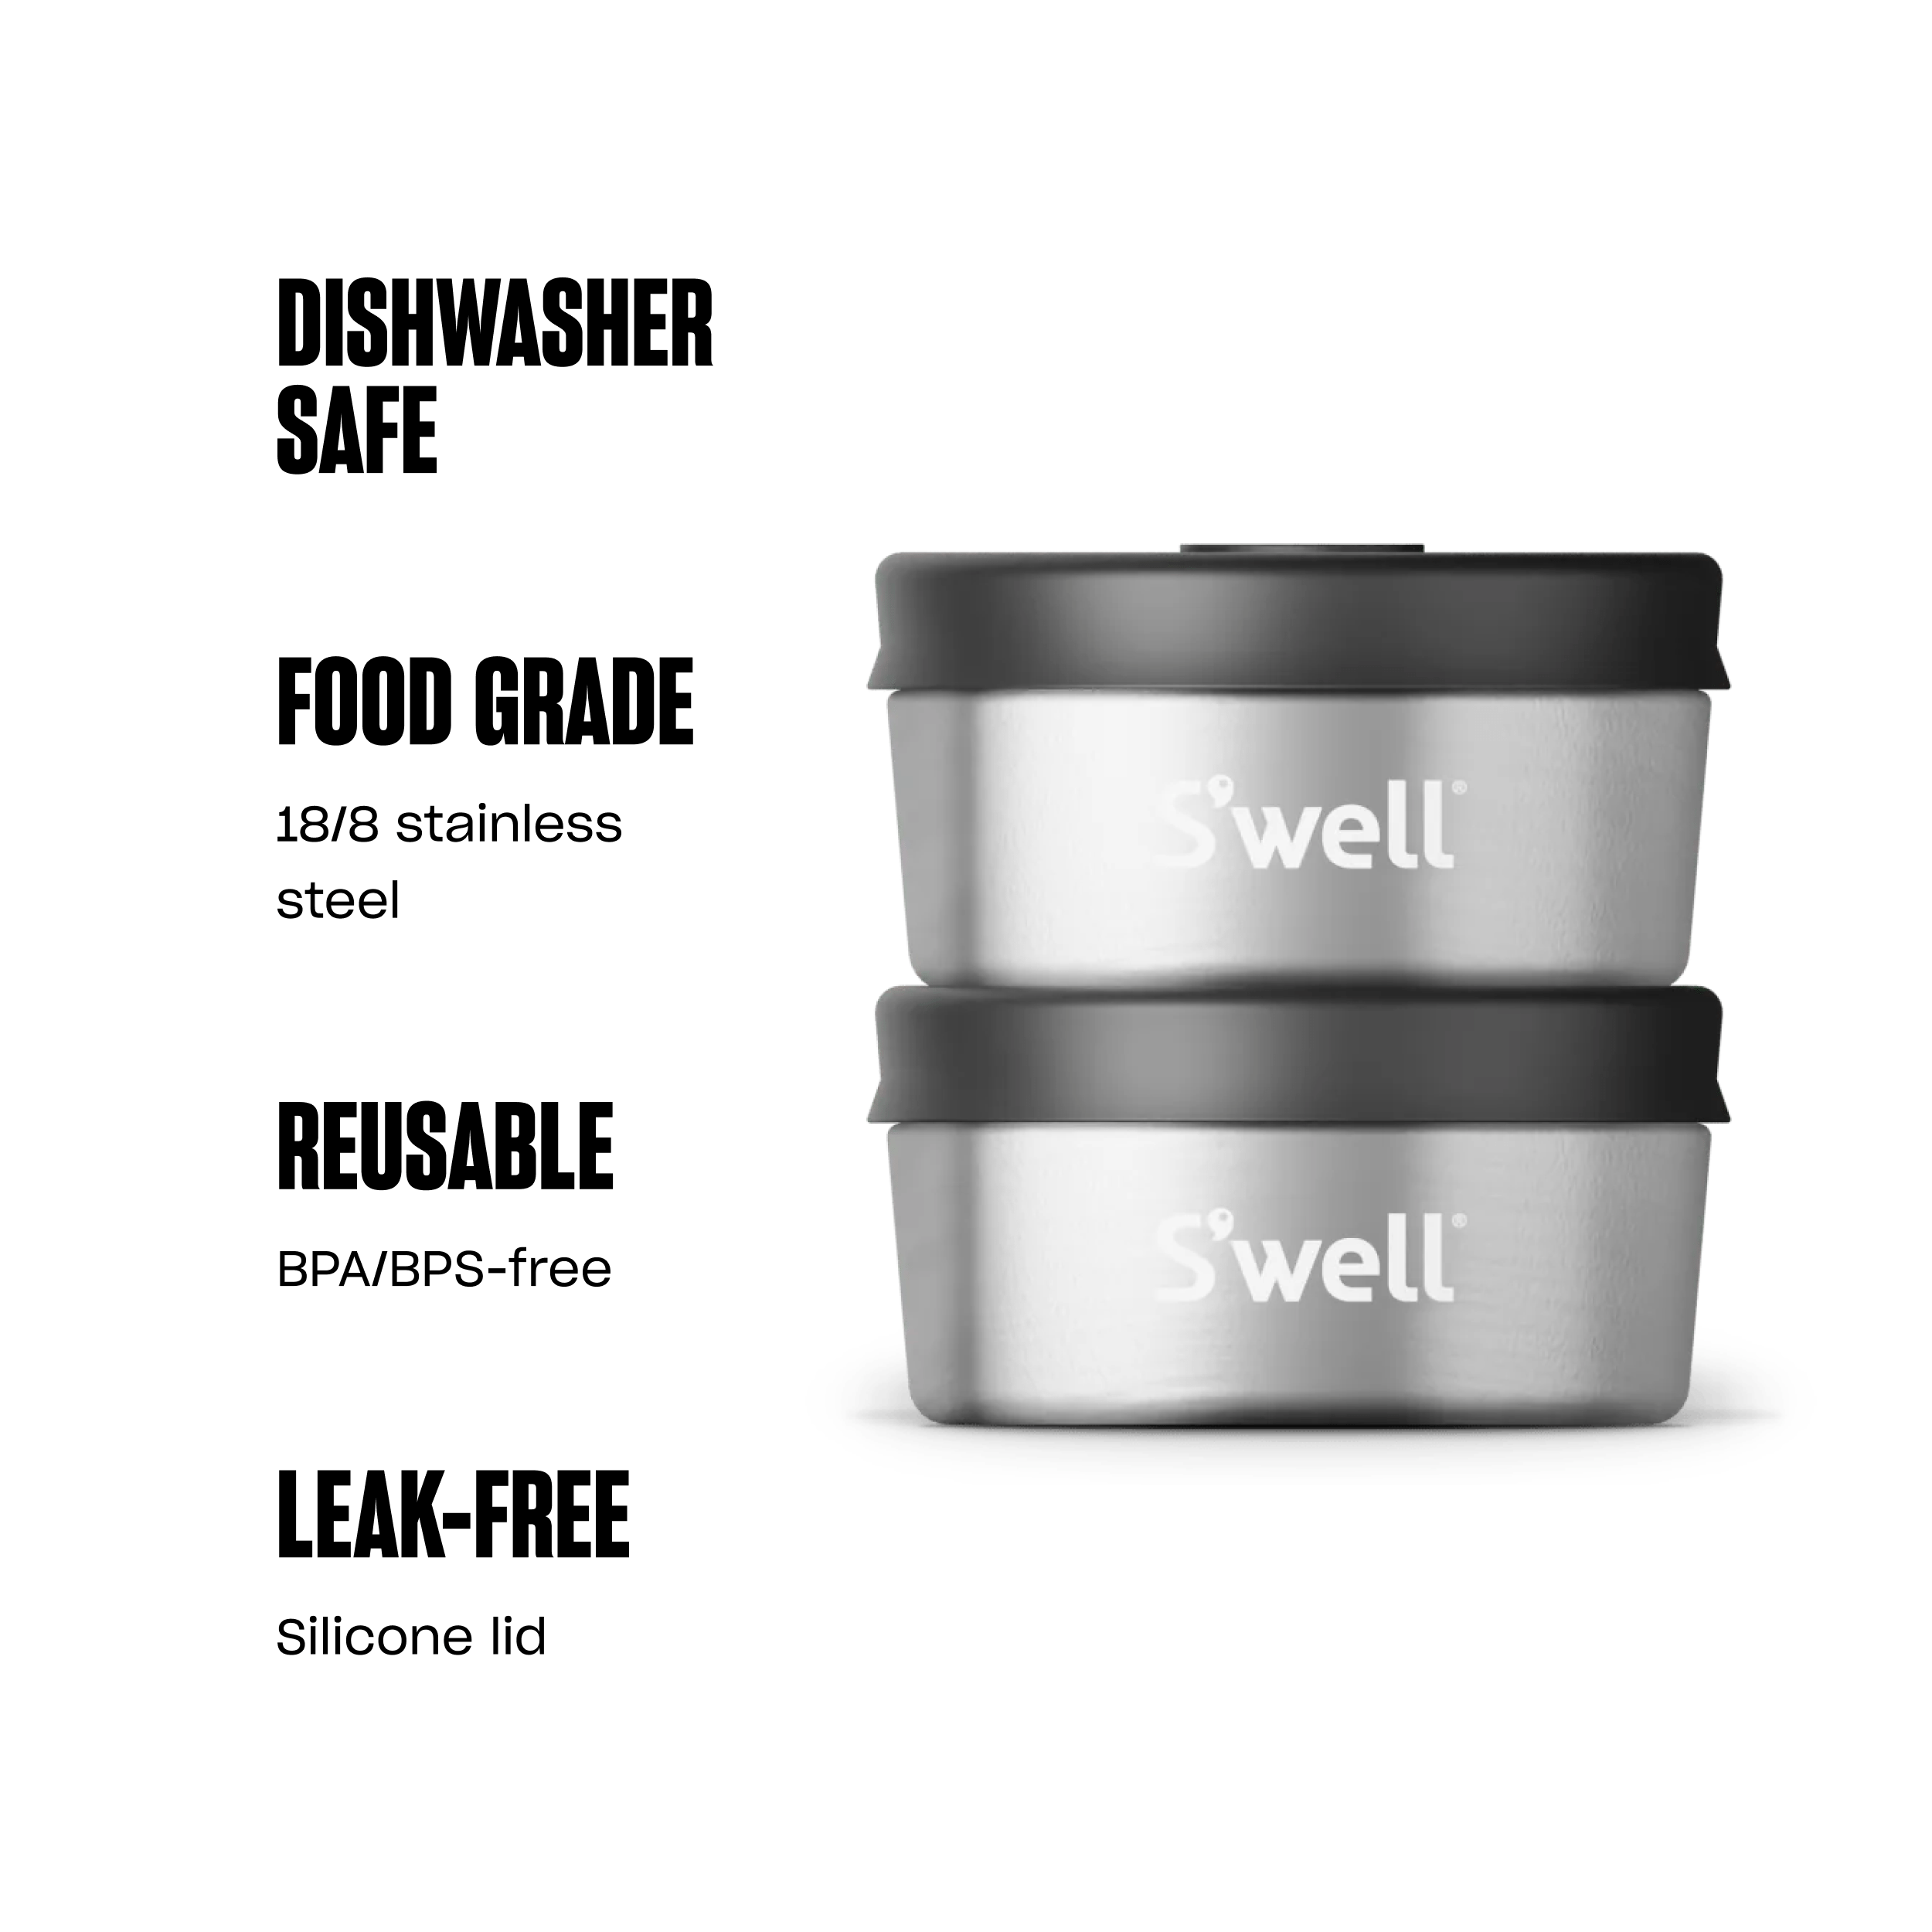 S'well® Salad Bowl Kit and Condiment Container Set - Promotional Giveaway